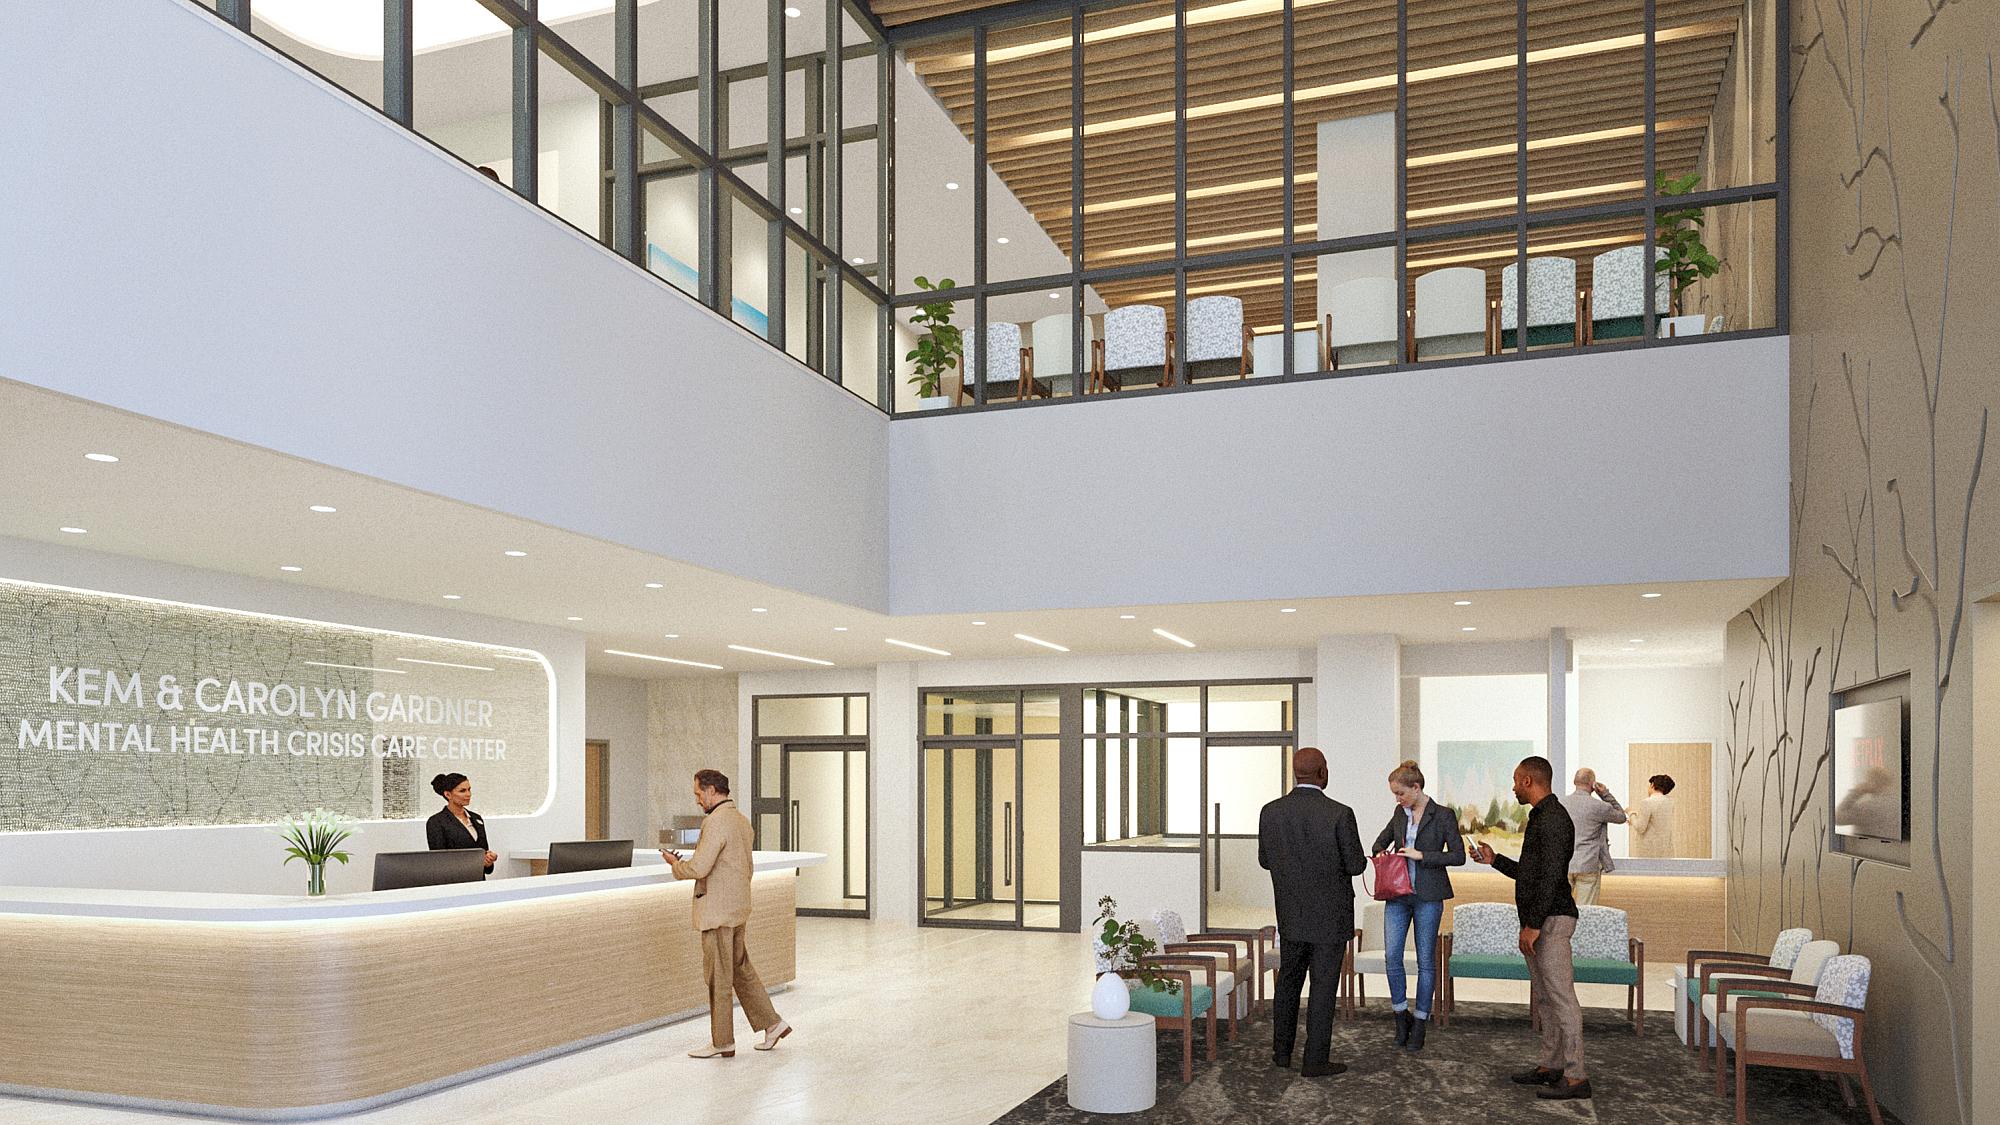 Conceptual rendering of crisis care center lobby